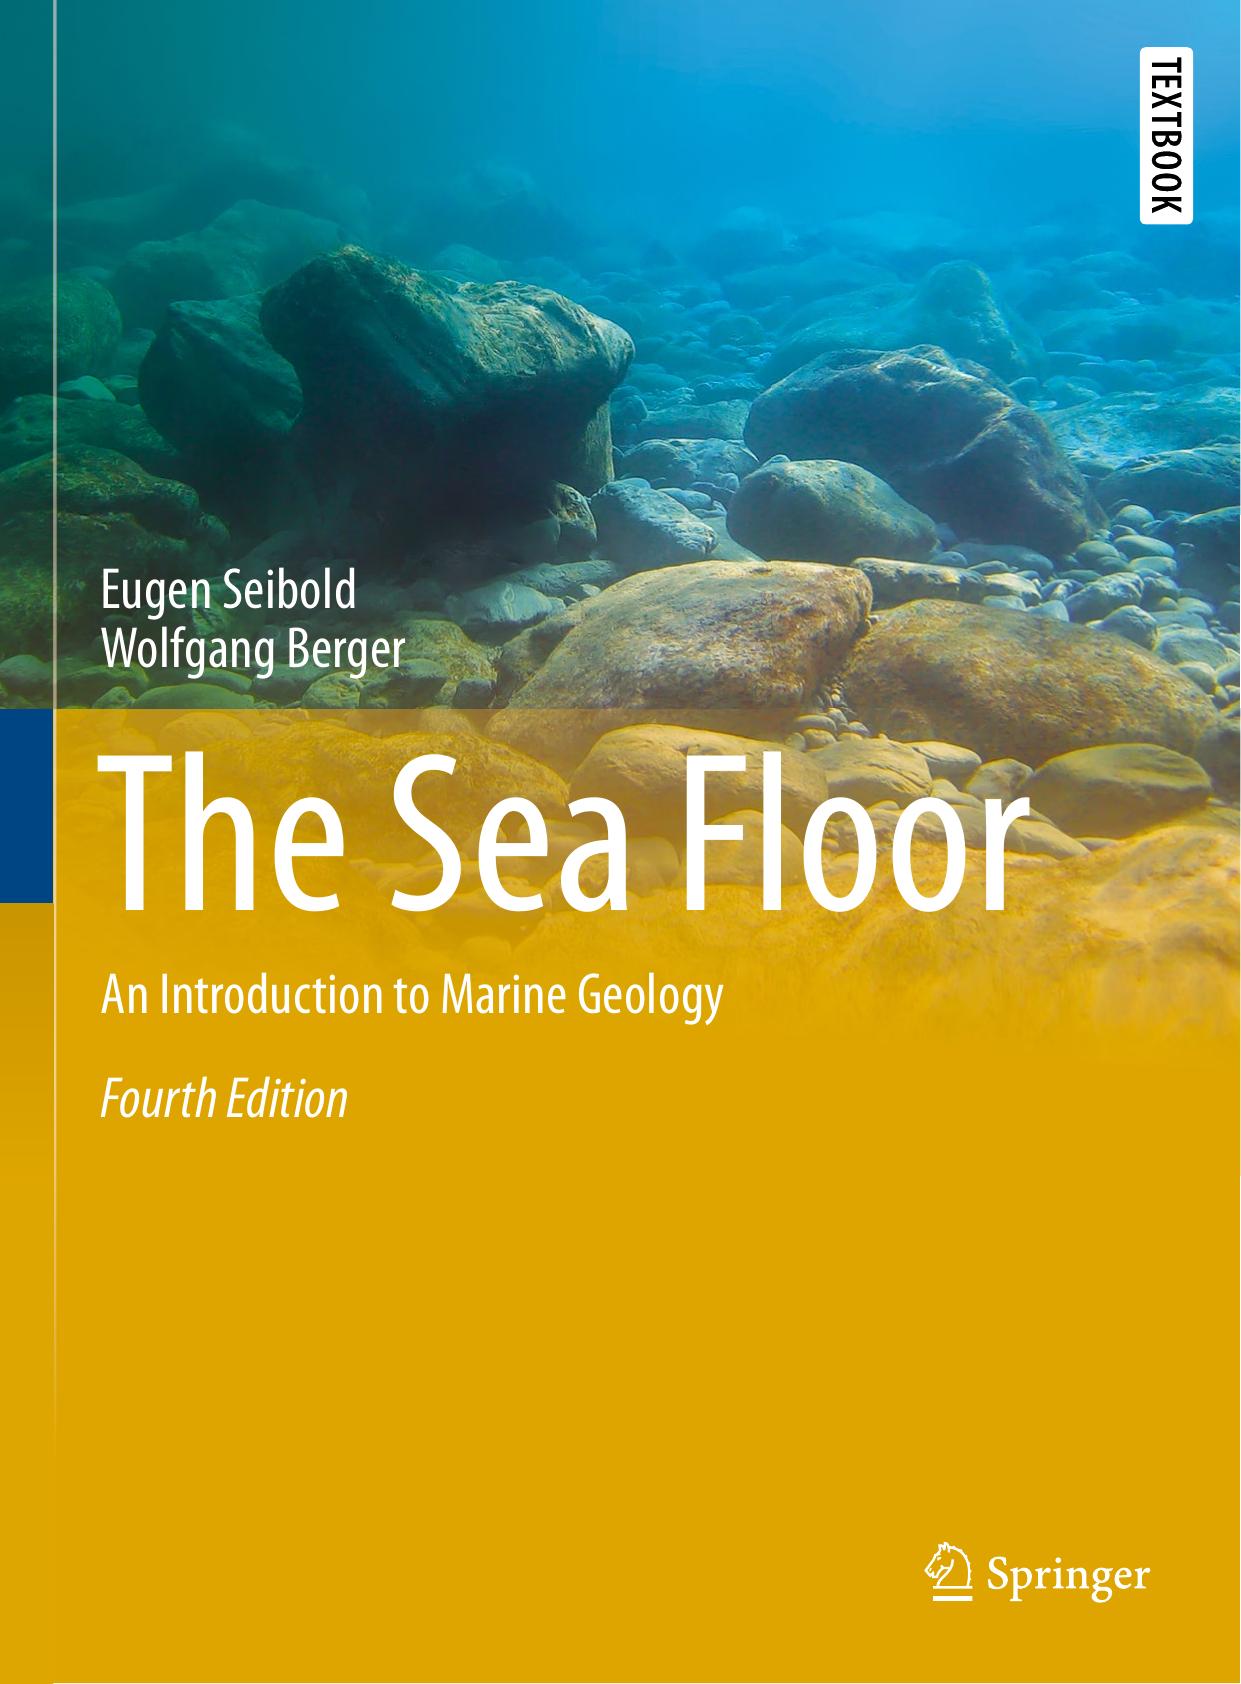 The Sea Floor by Eugen Seibold & Wolfgang Berger